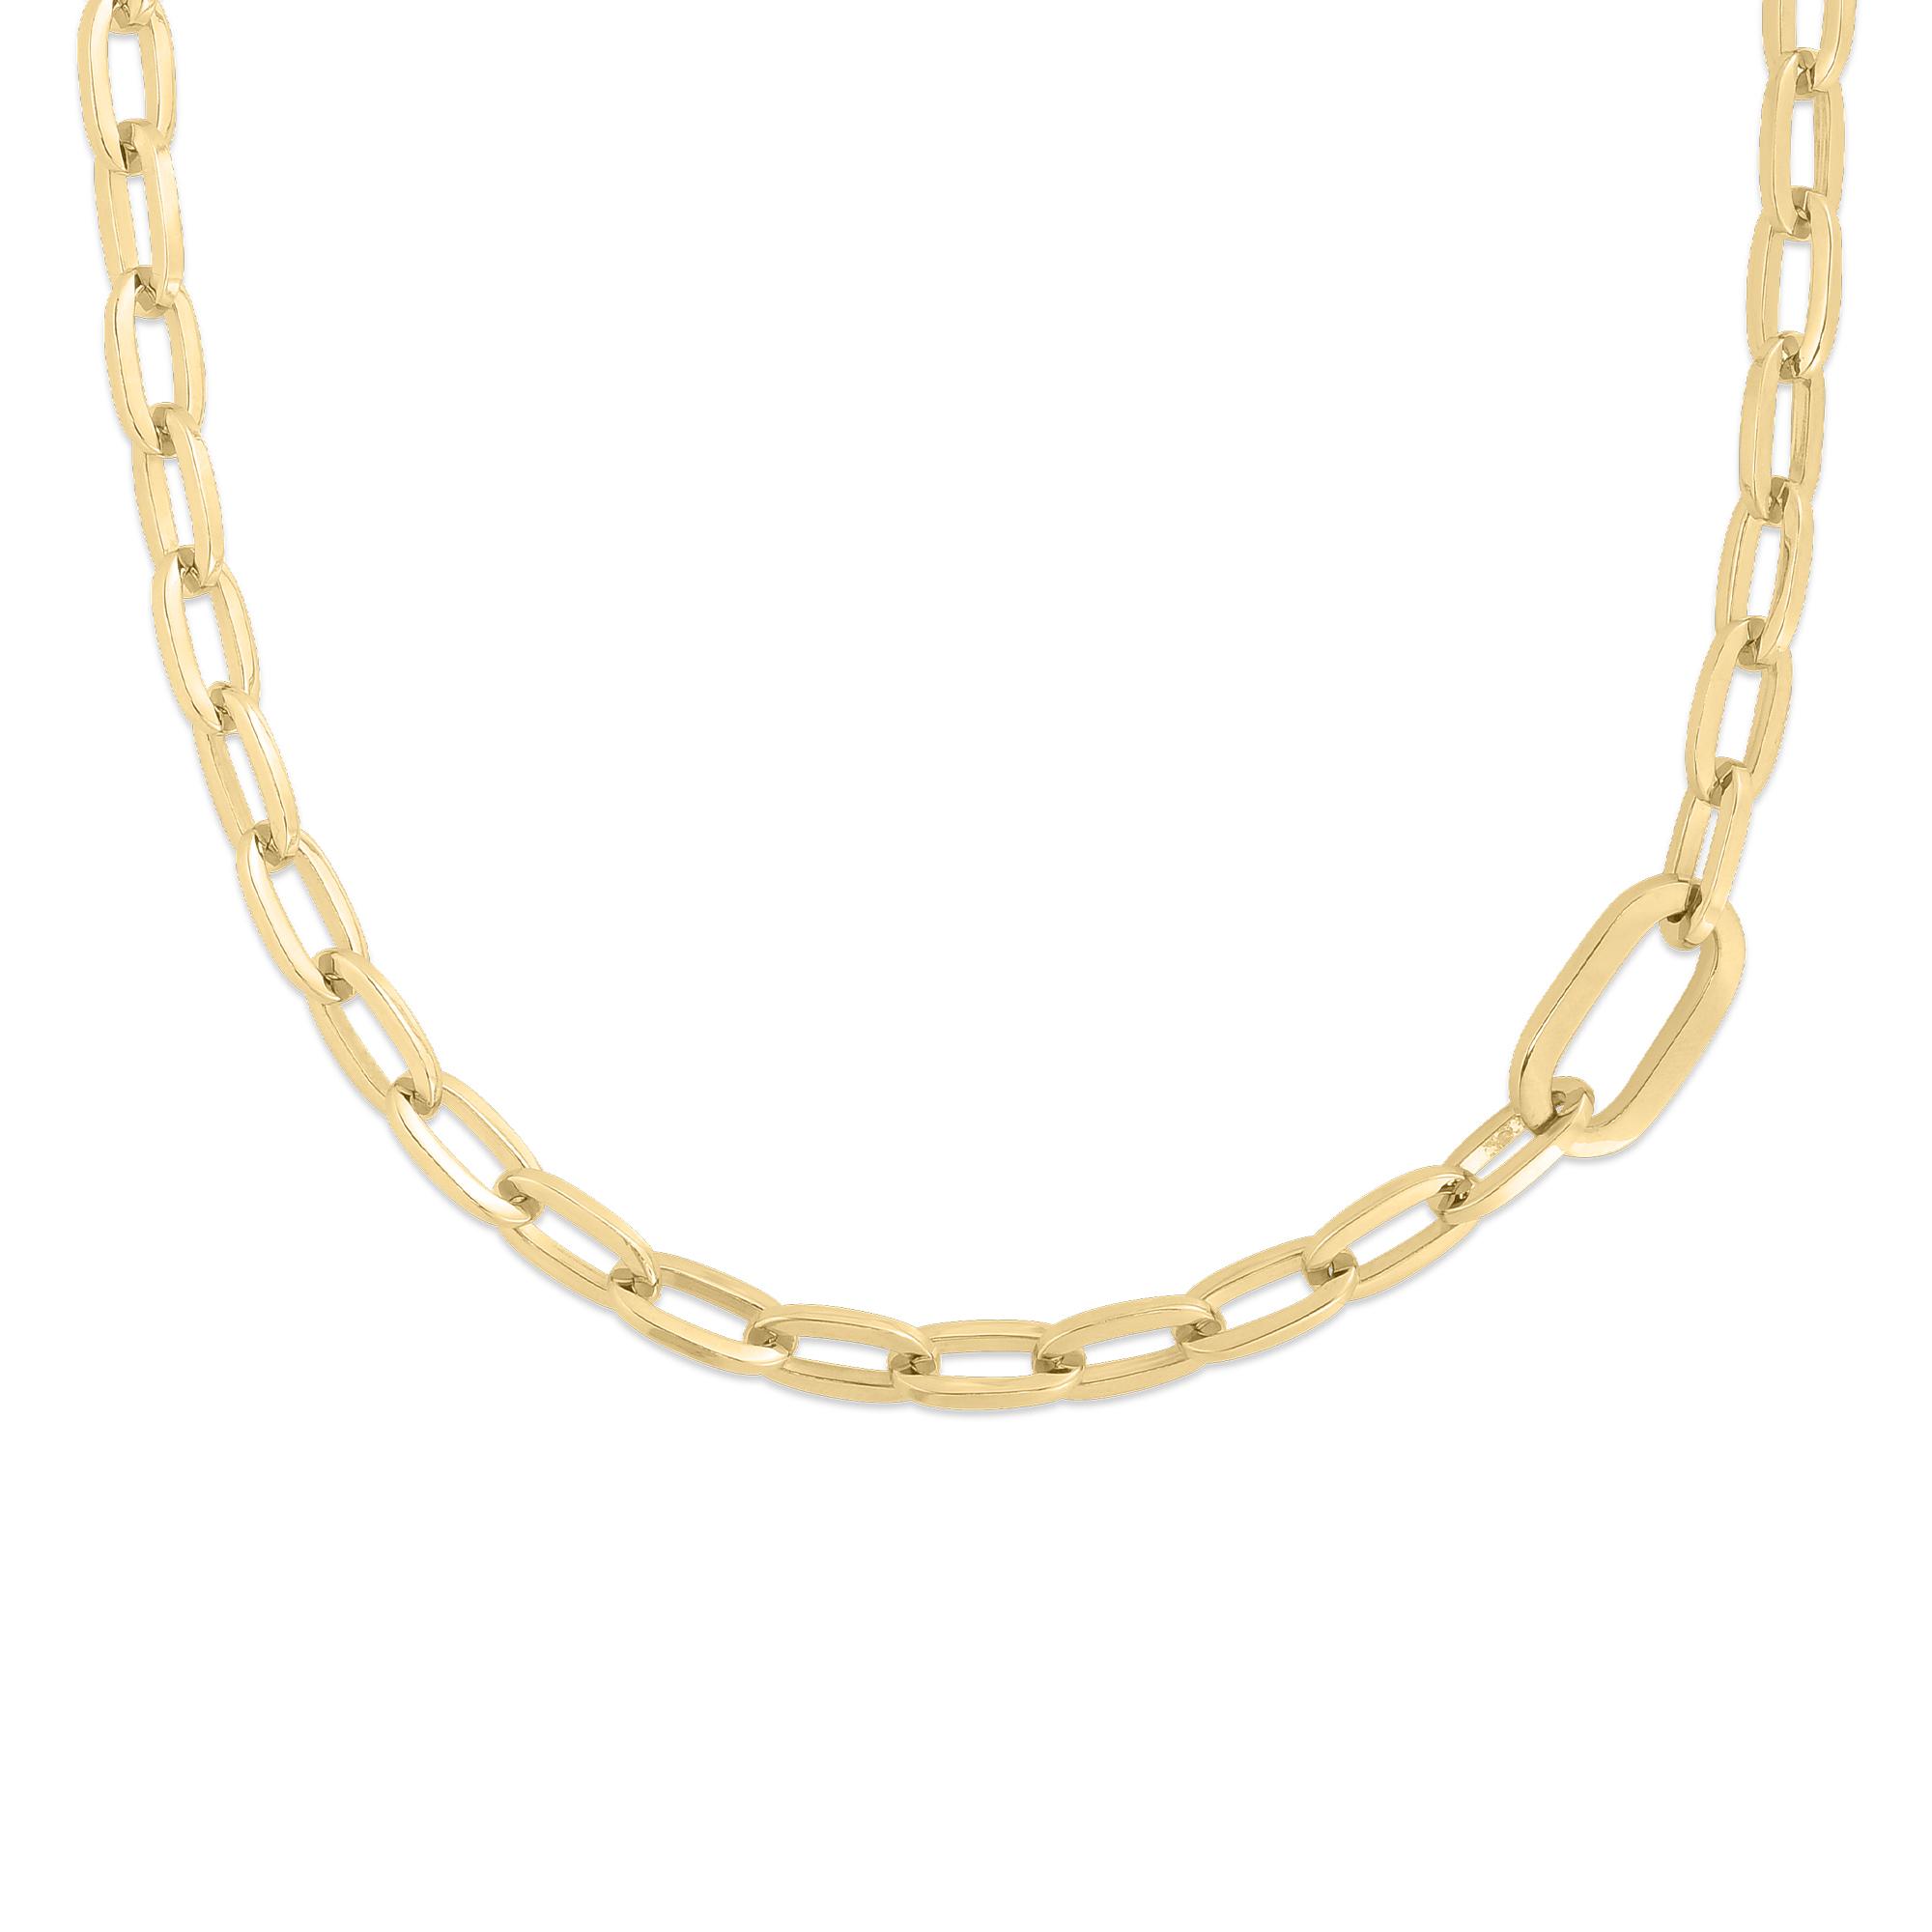 Roberto Coin Designer Gold Paperclip Necklace with Large Center Link 0